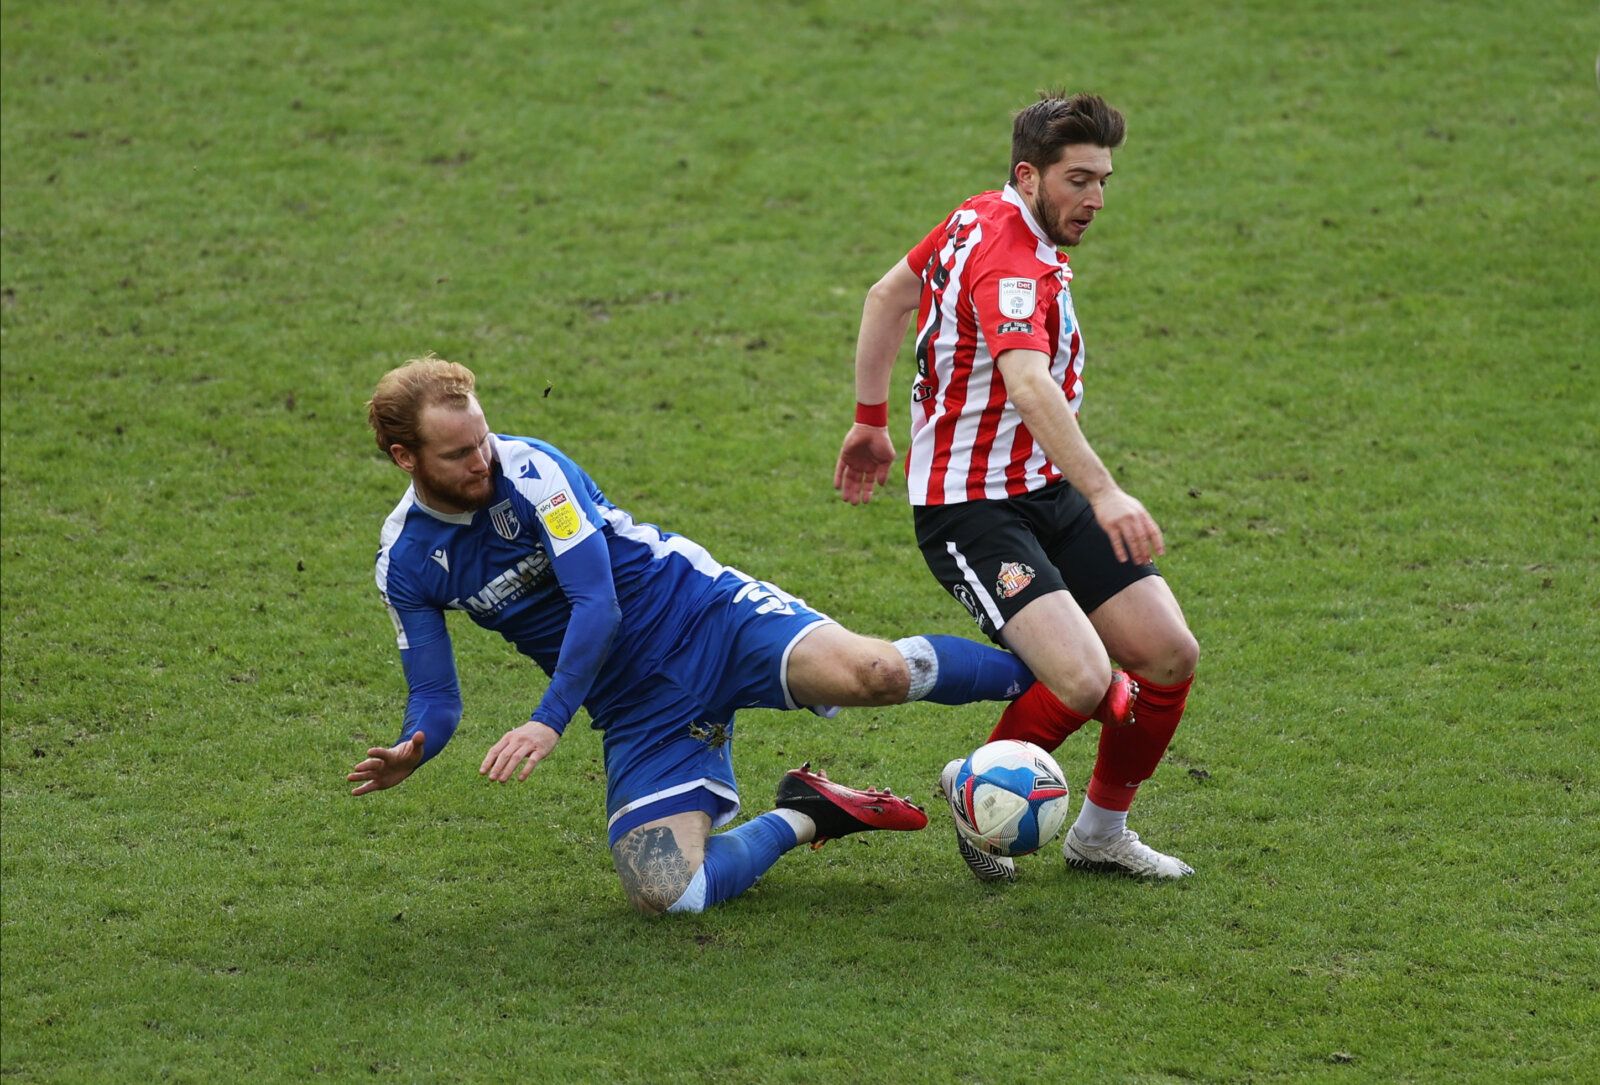 Soccer Football - League One - Sunderland v Gillingham - Stadium of Light, Sunderland, Britain - January 30, 2021 Sunderland's Lynden Gooch in action with Gillingham's Connor Ogilvie Action Images/Lee Smith EDITORIAL USE ONLY. No use with unauthorized audio, video, data, fixture lists, club/league logos or 'live' services. Online in-match use limited to 75 images, no video emulation. No use in betting, games or single club /league/player publications.  Please contact your account representative 